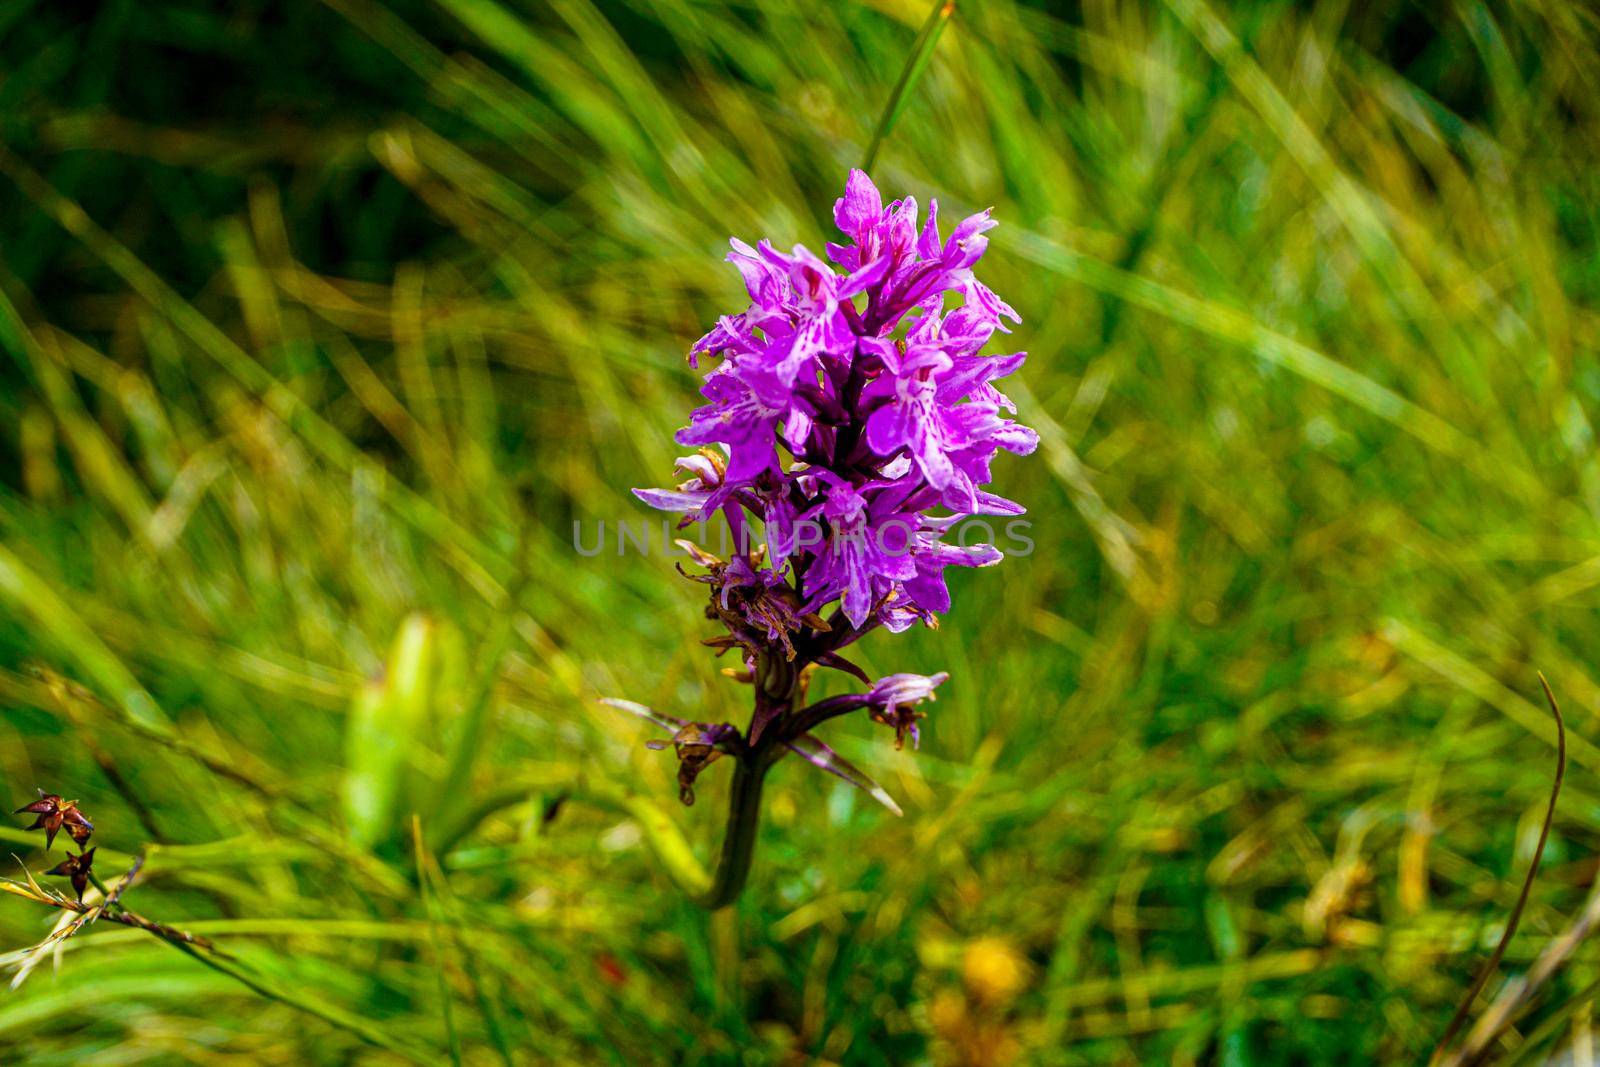 Beautiful blossoms of the heath spotted-orchid Dactylorhiza maculata by pisces2386